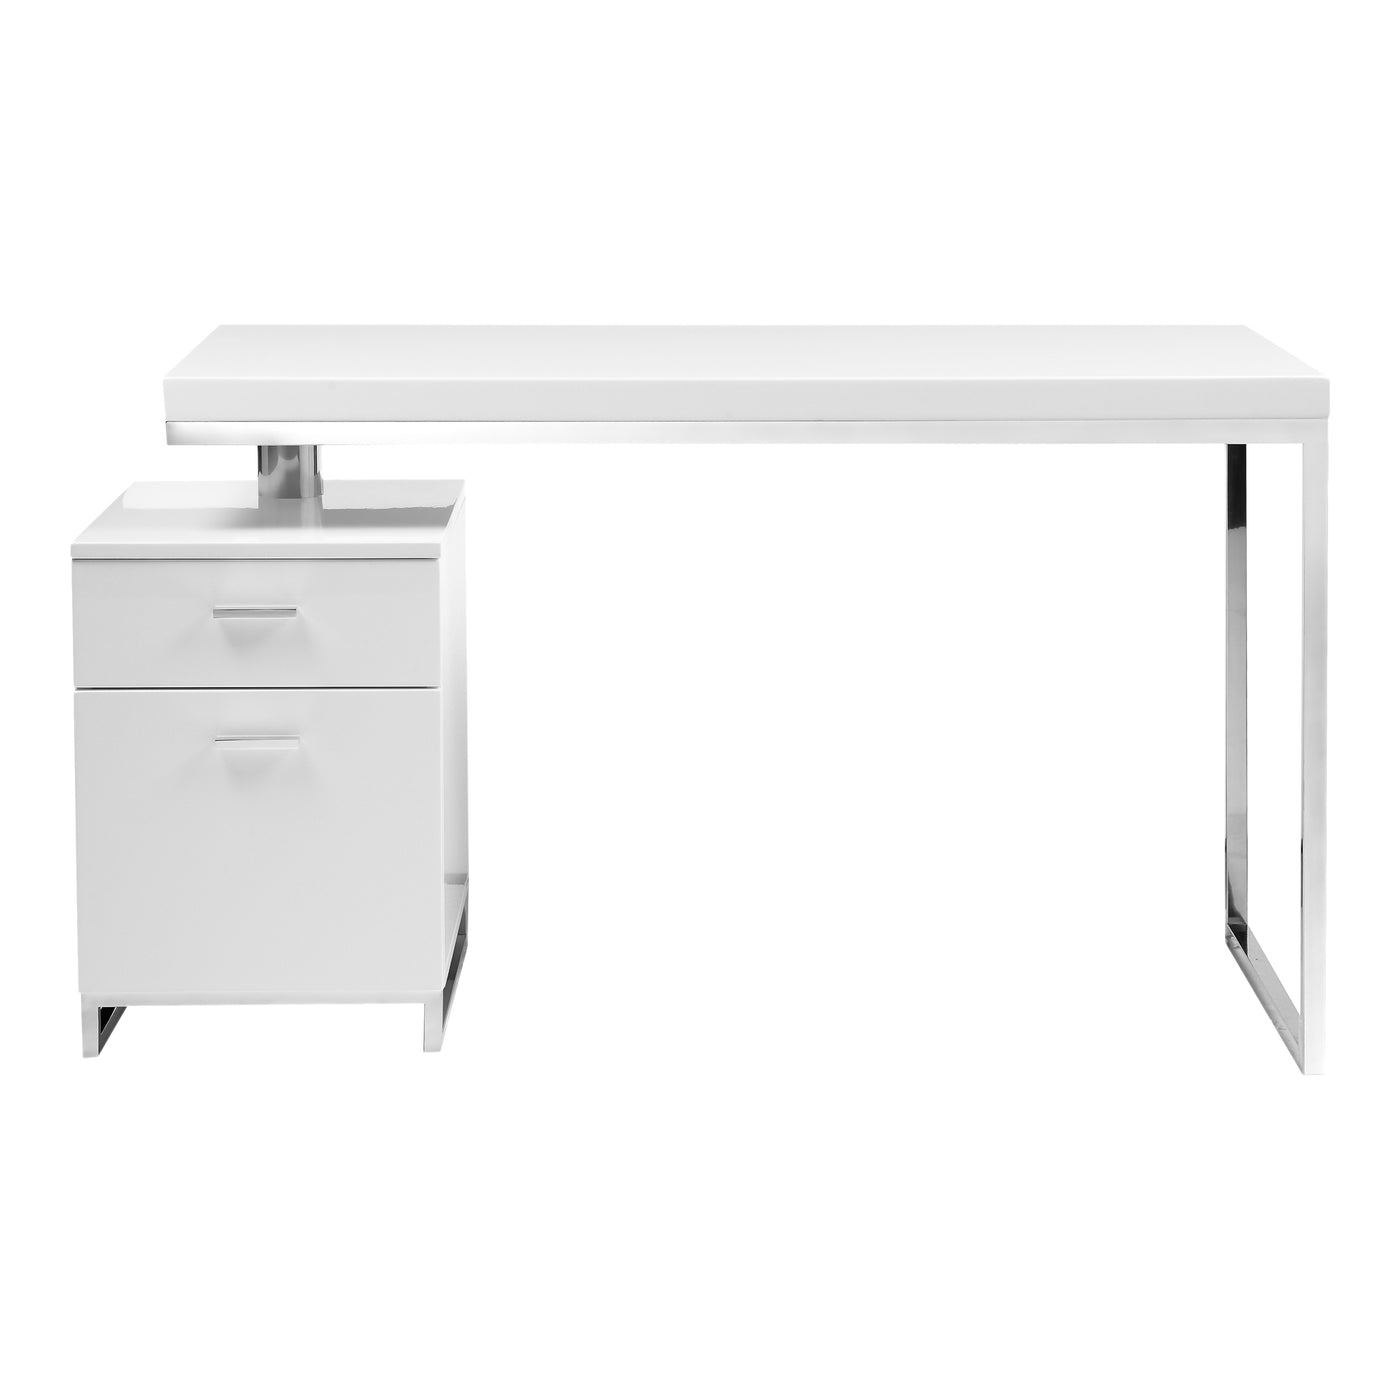 Ideal for the home office, this contemporary desk features a sleek, minimalist design complete with a filing cabinet. This...